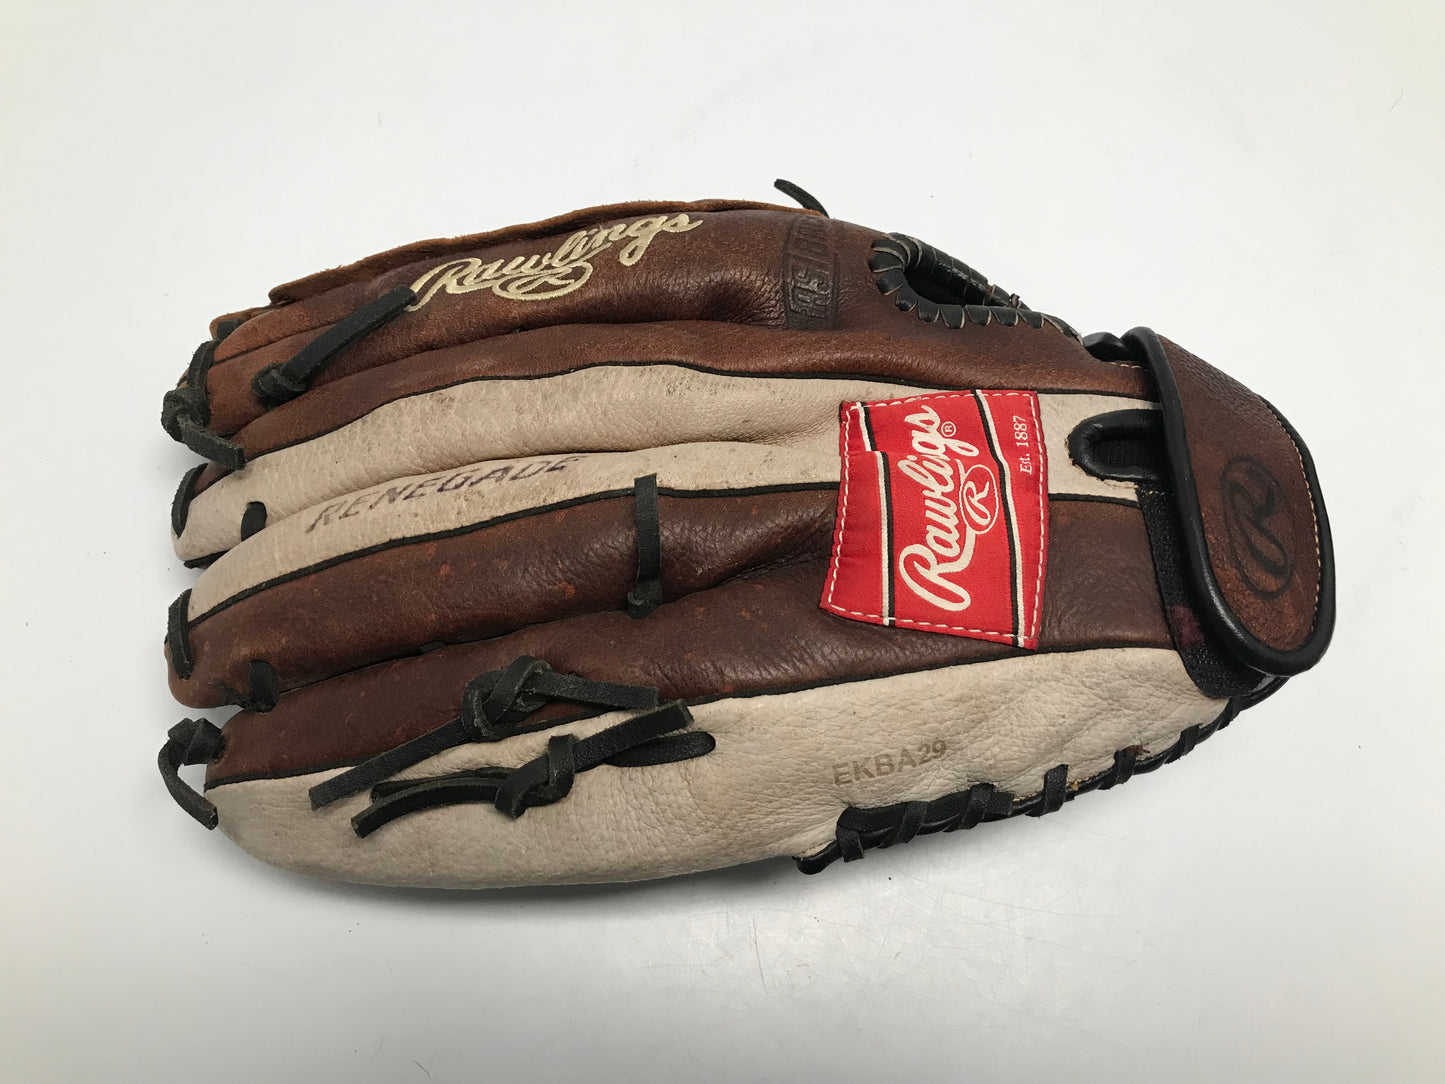 Baseball Glove Adult Size 14 Inch Rawlings Leather Brown Tan Fits on Left Hand